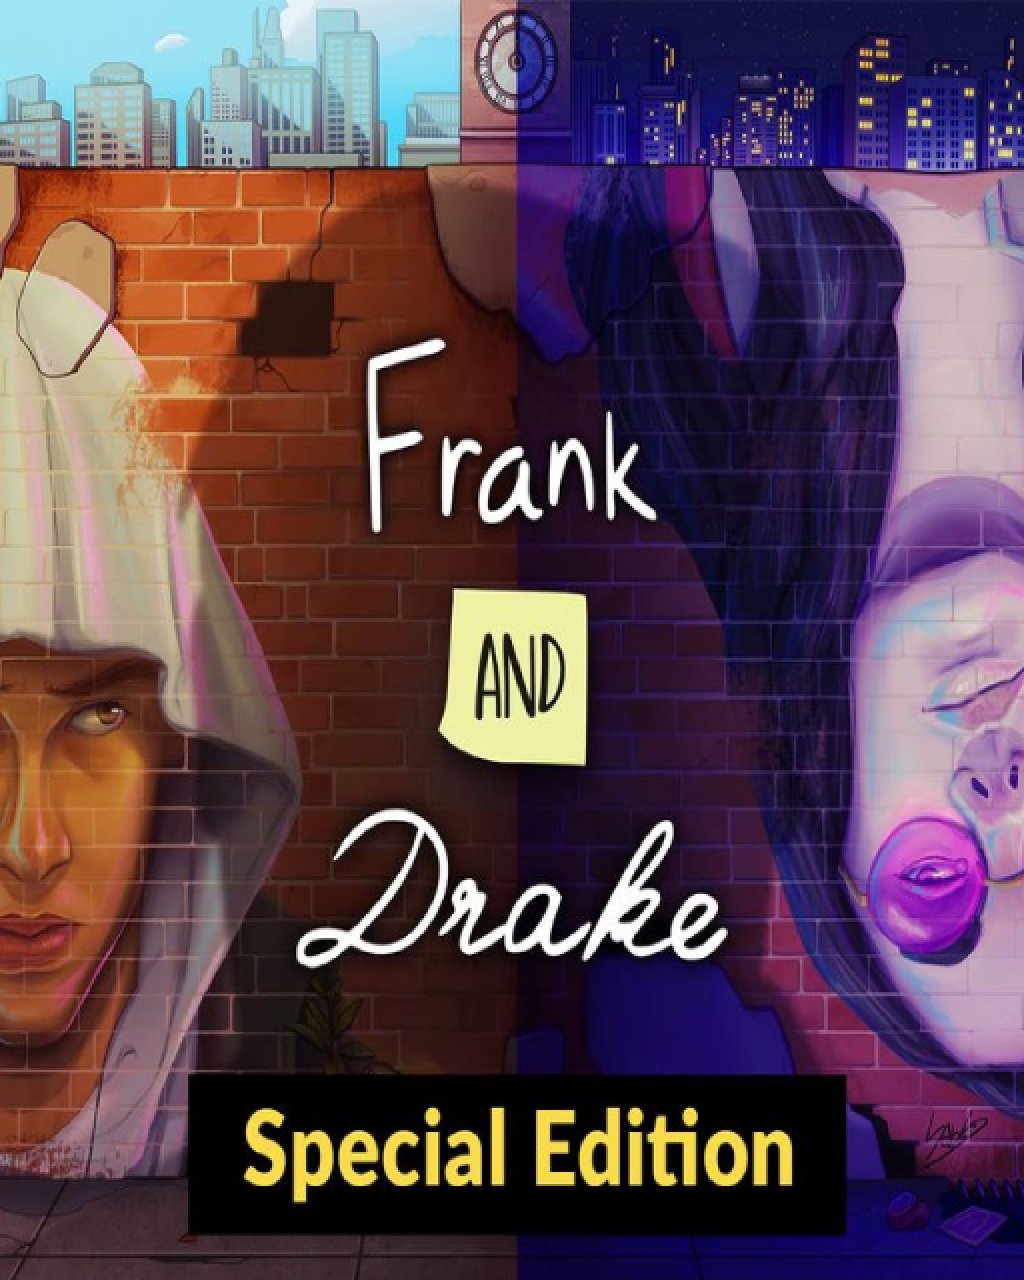 Frank and Drake Special Edition